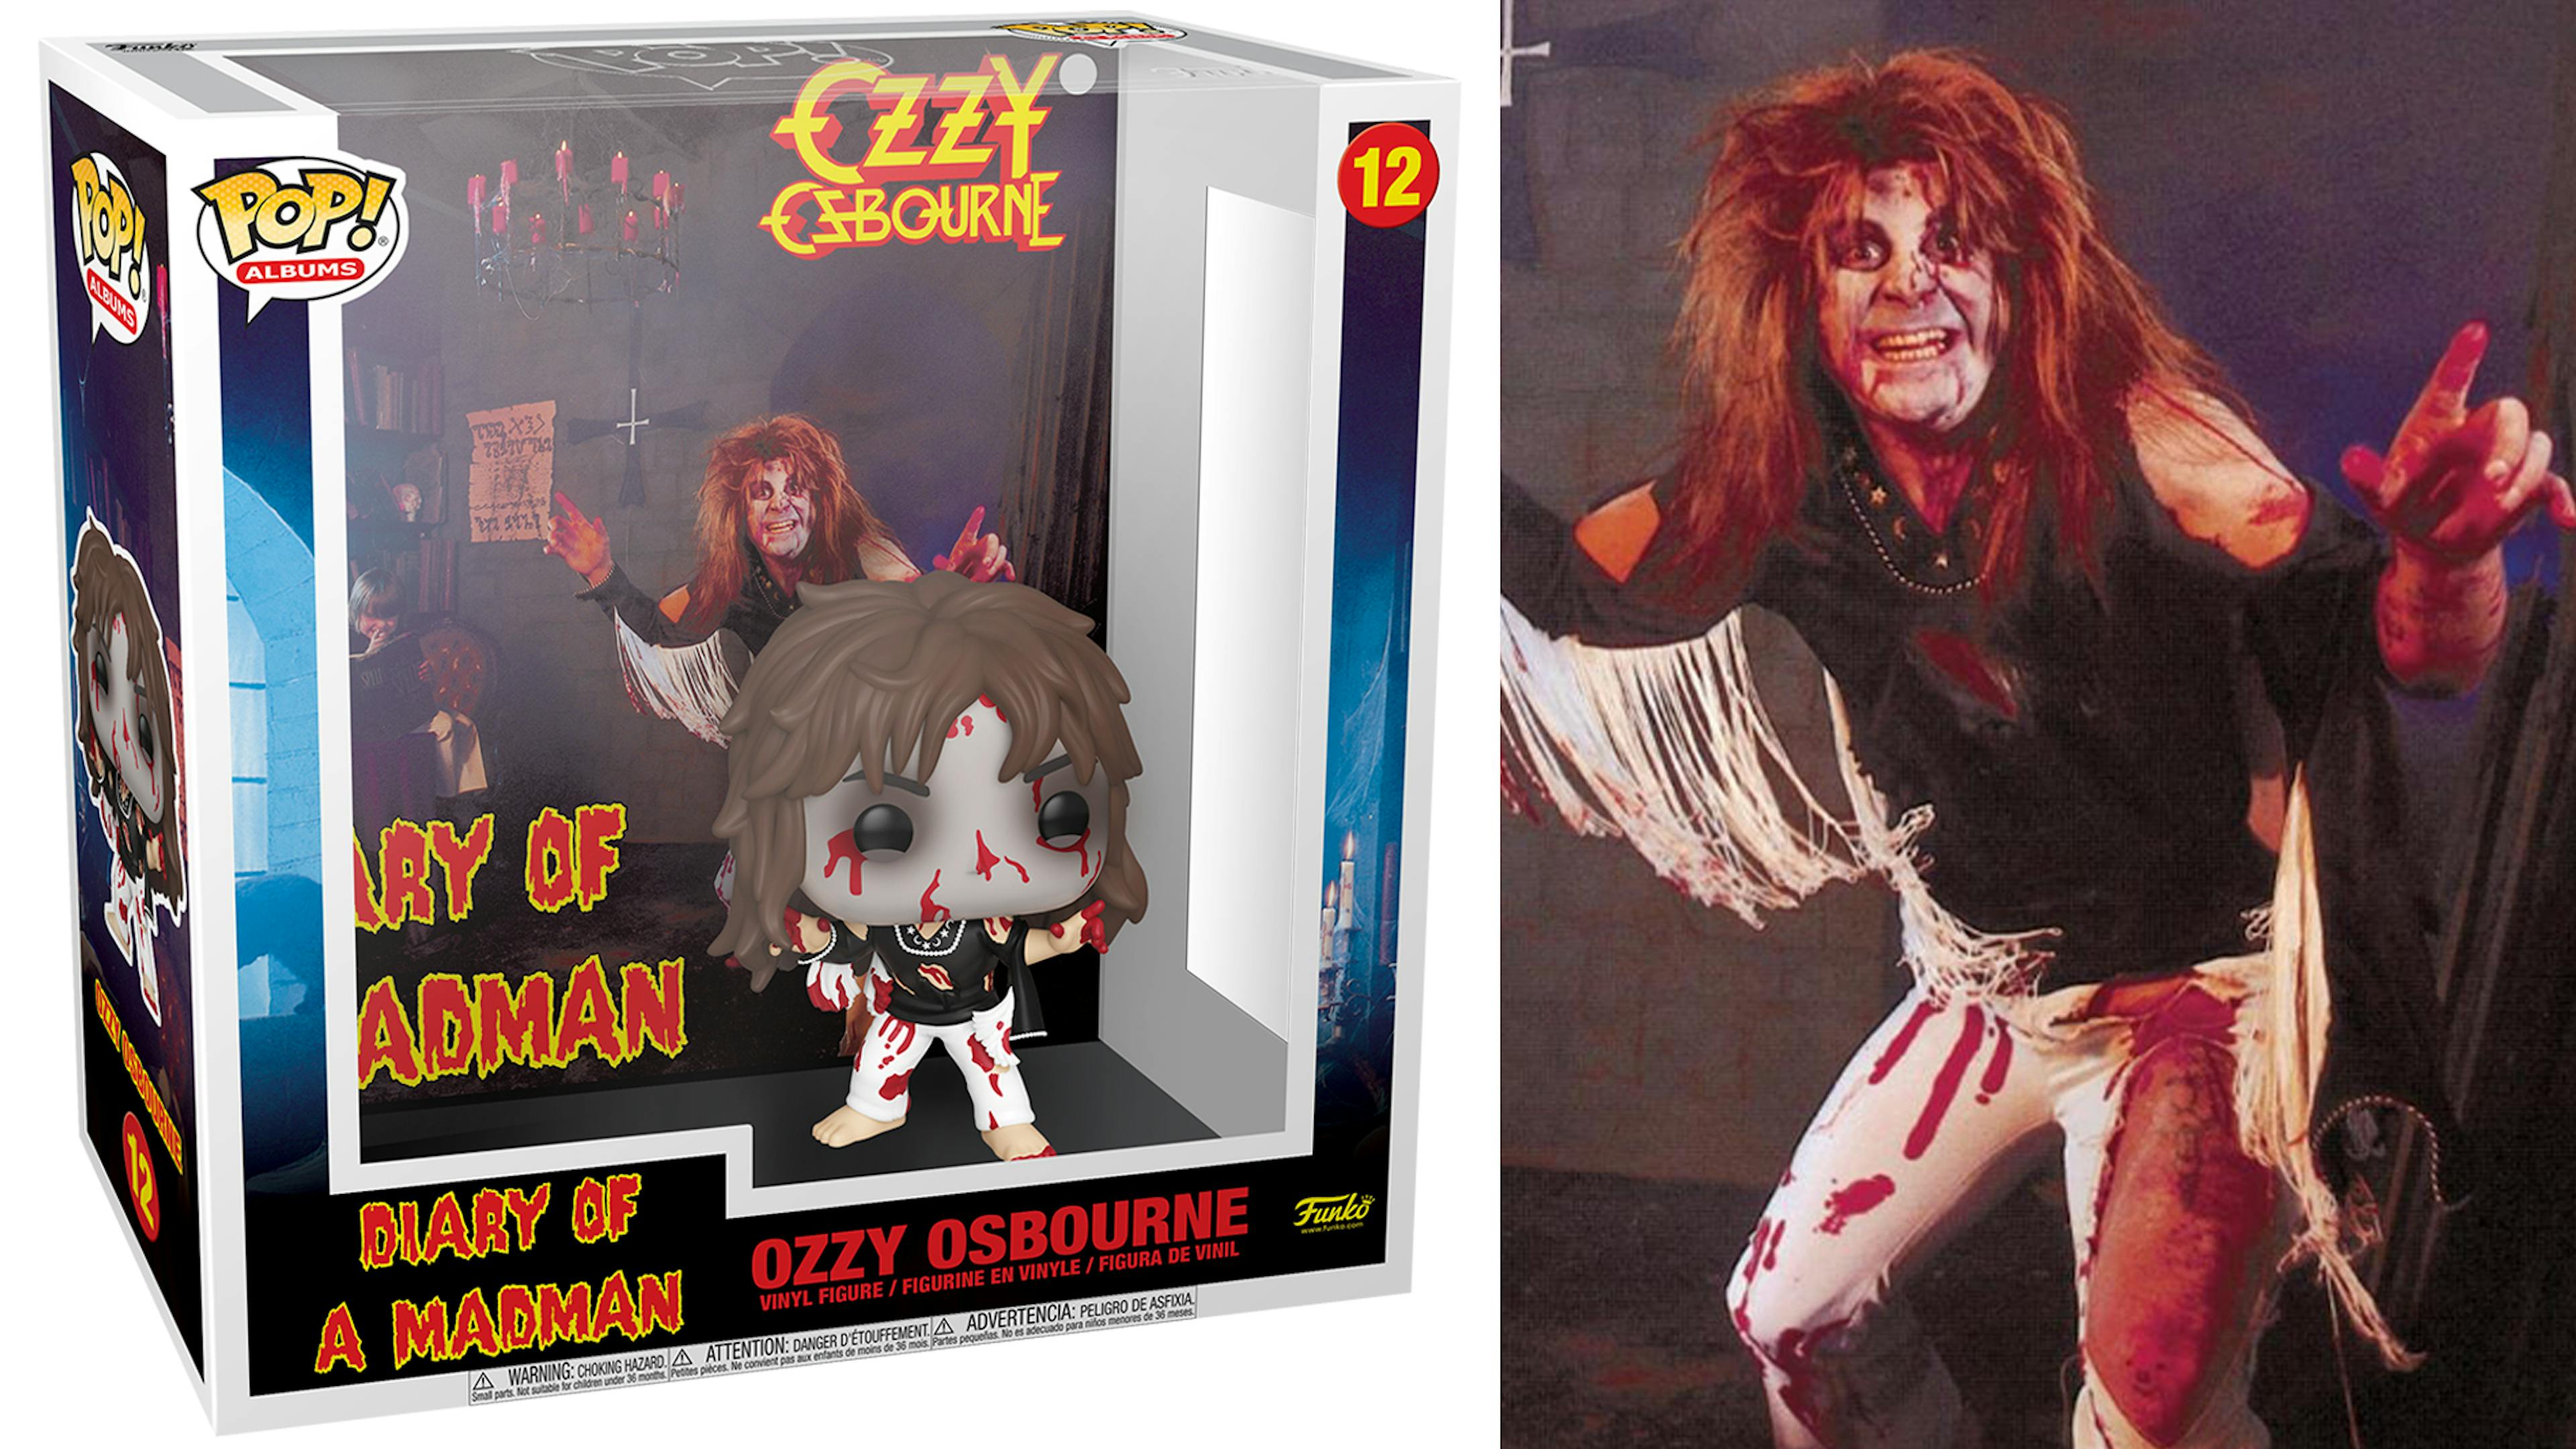 Exclusive first look: Ozzy Osbourne's Diary Of A Madman gets the Funko POP! vinyl treatment